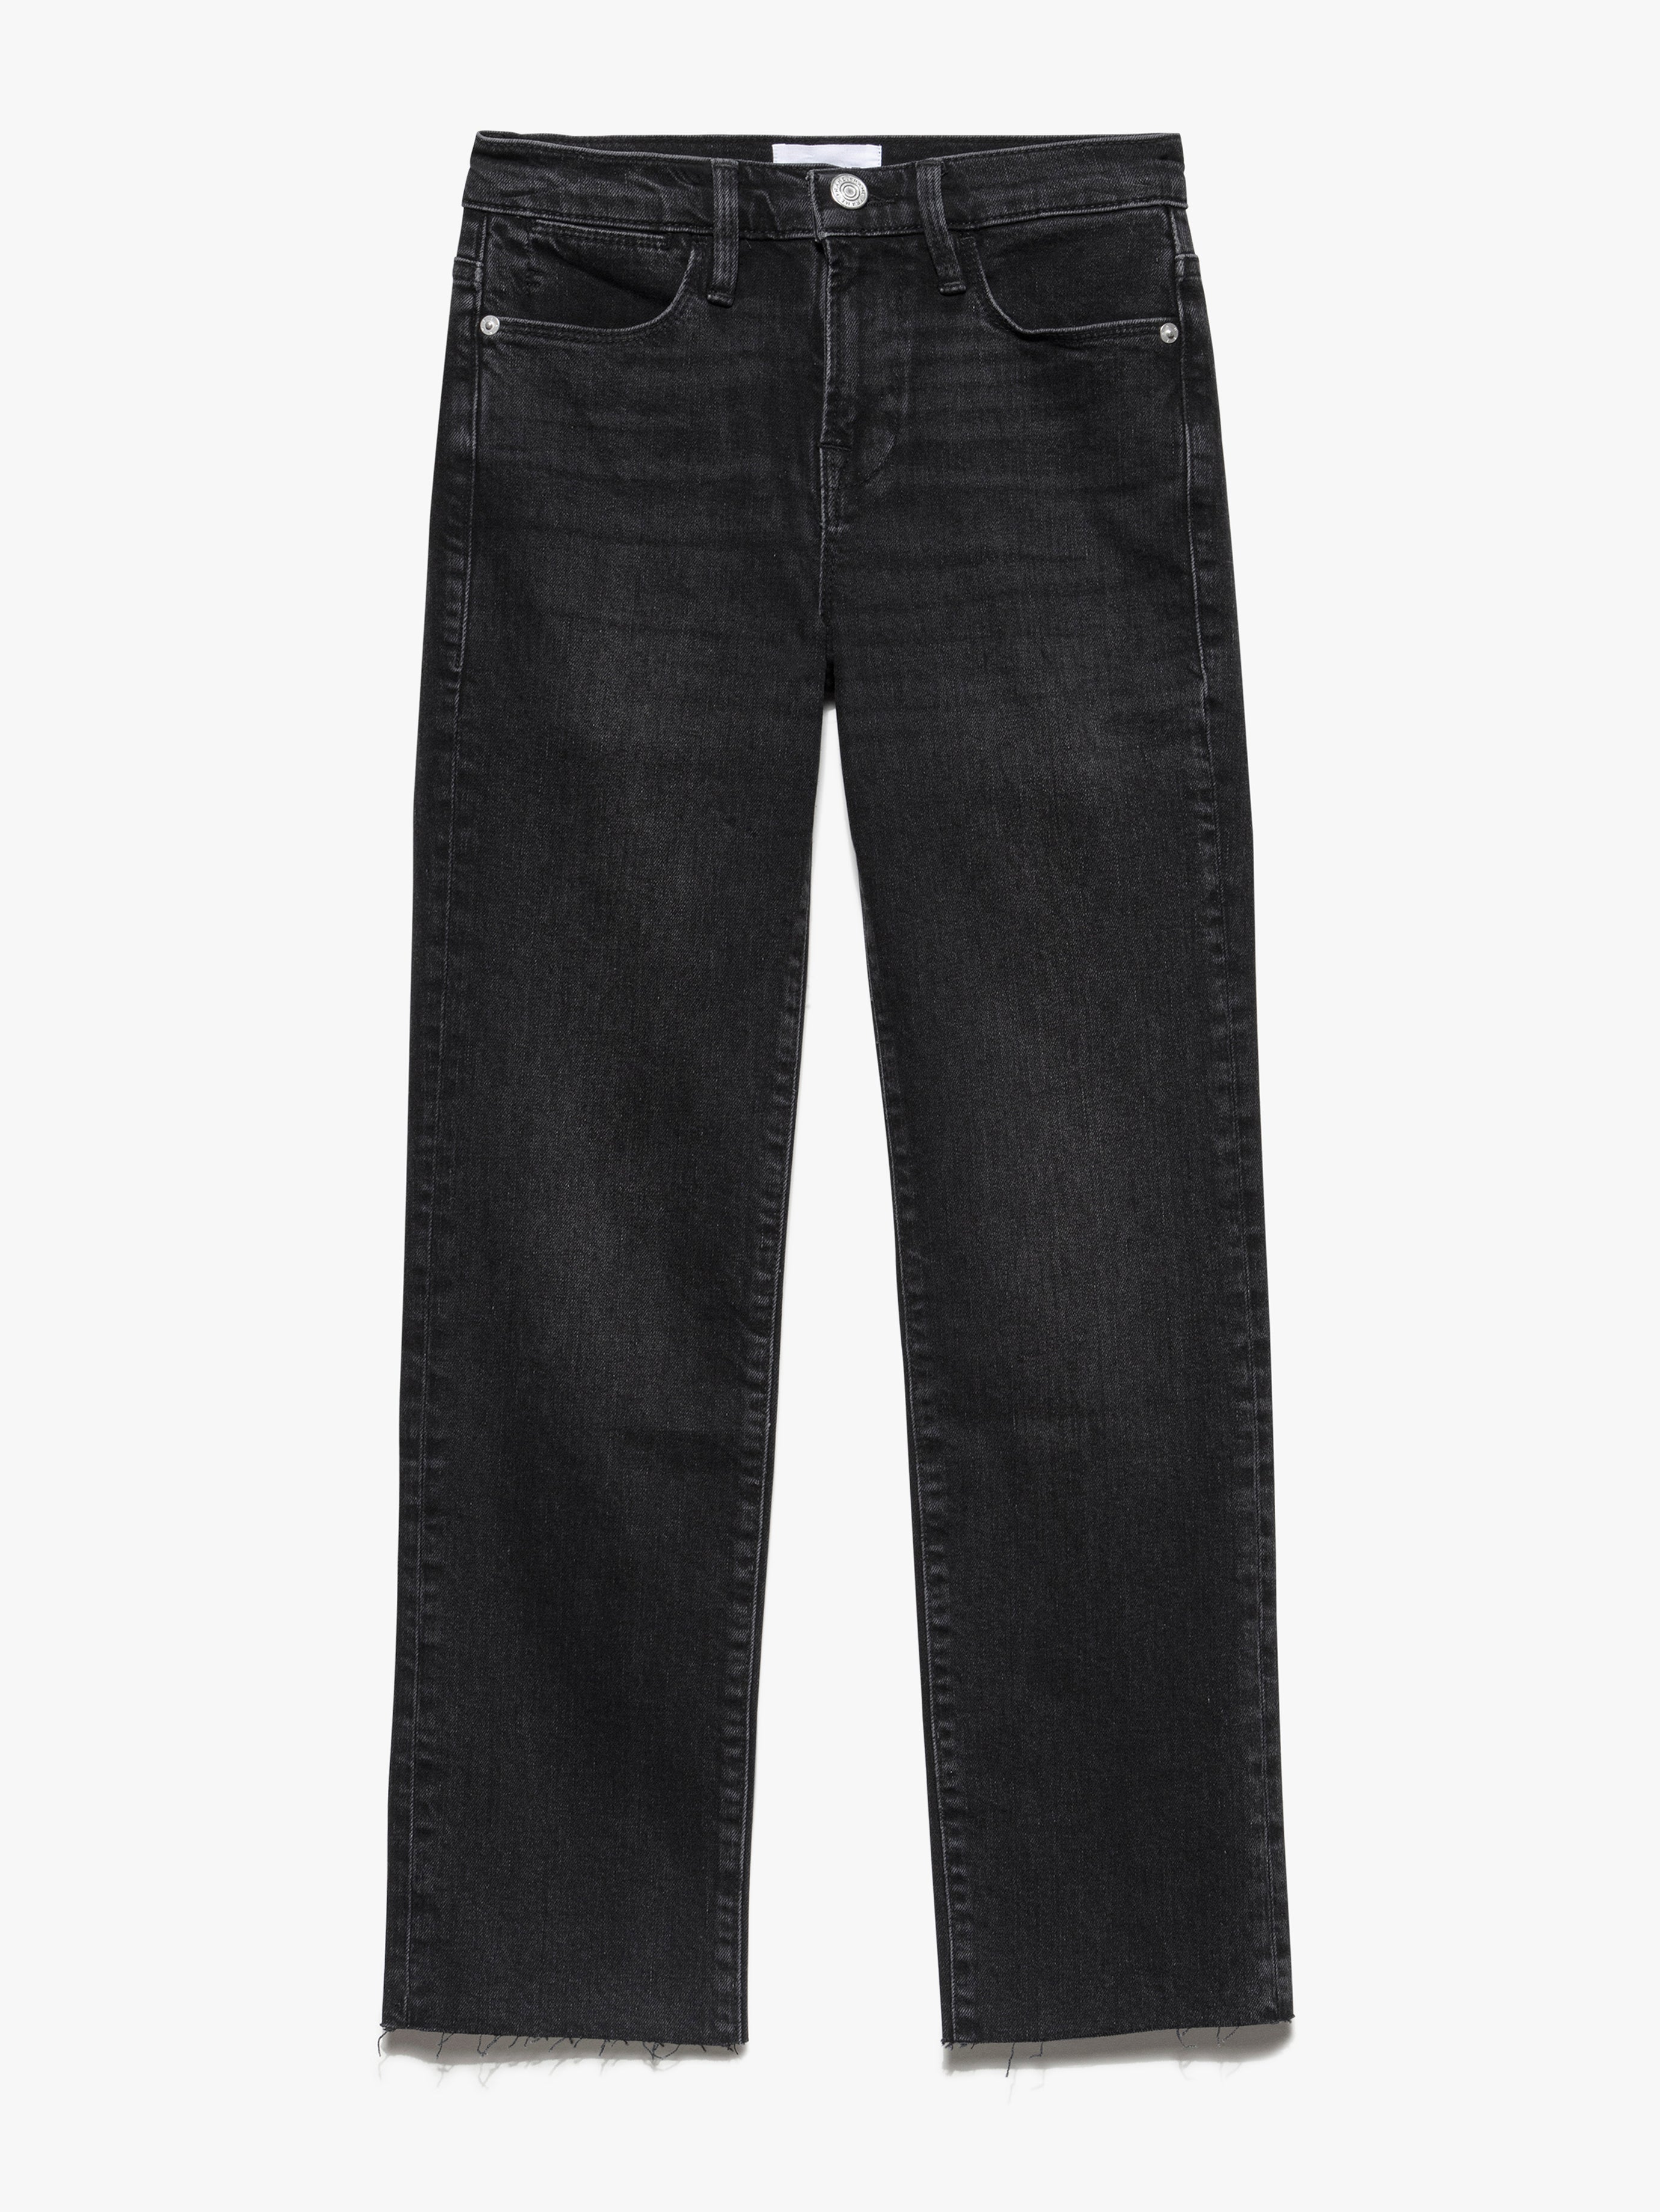 A pair of Le High Straight Released Hem - Hutchison black jeans from Frame with frayed hems and premium stretch denim.